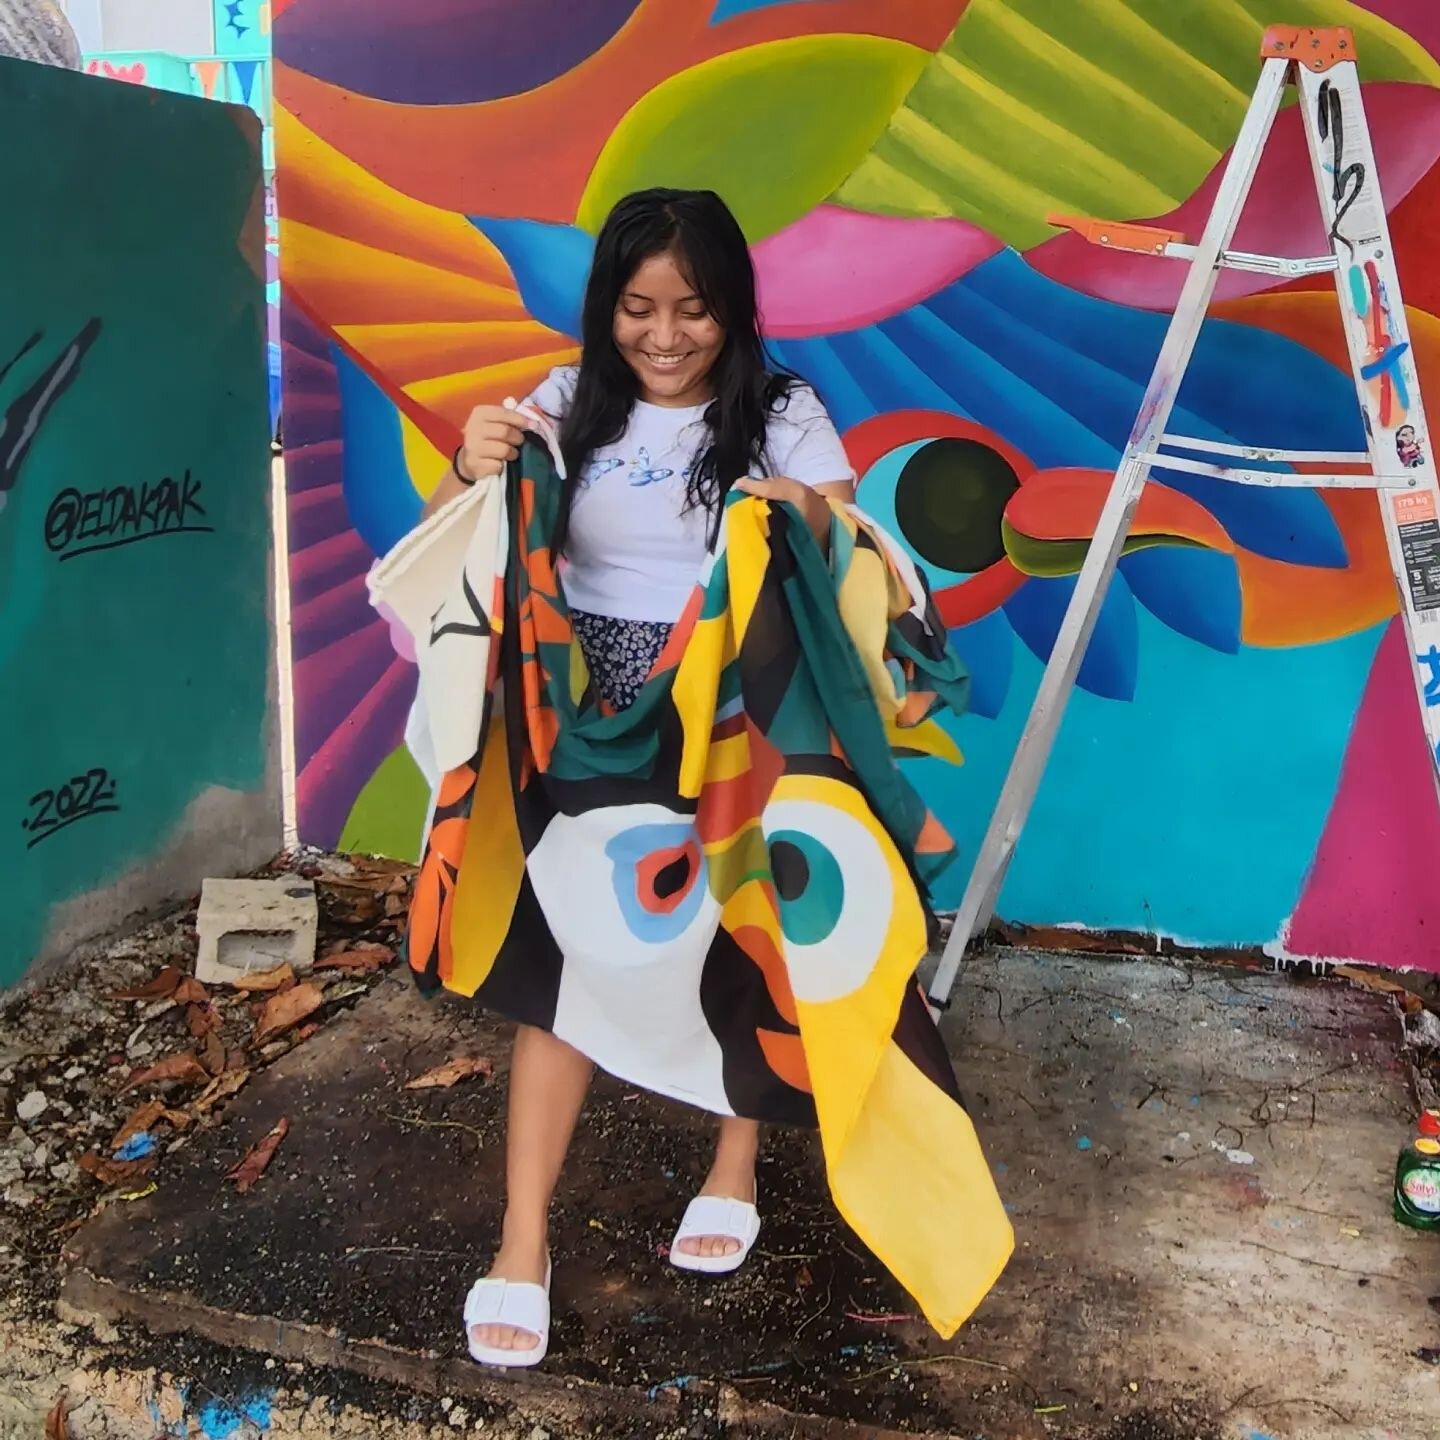 Thank you @akumalartsfestival for allowing us to show you Lluvia's (Rain) art work.

She is the first young lady originally from Akumal going to college for the first time, she got college scholarship (graphic design) support from the beginning to th